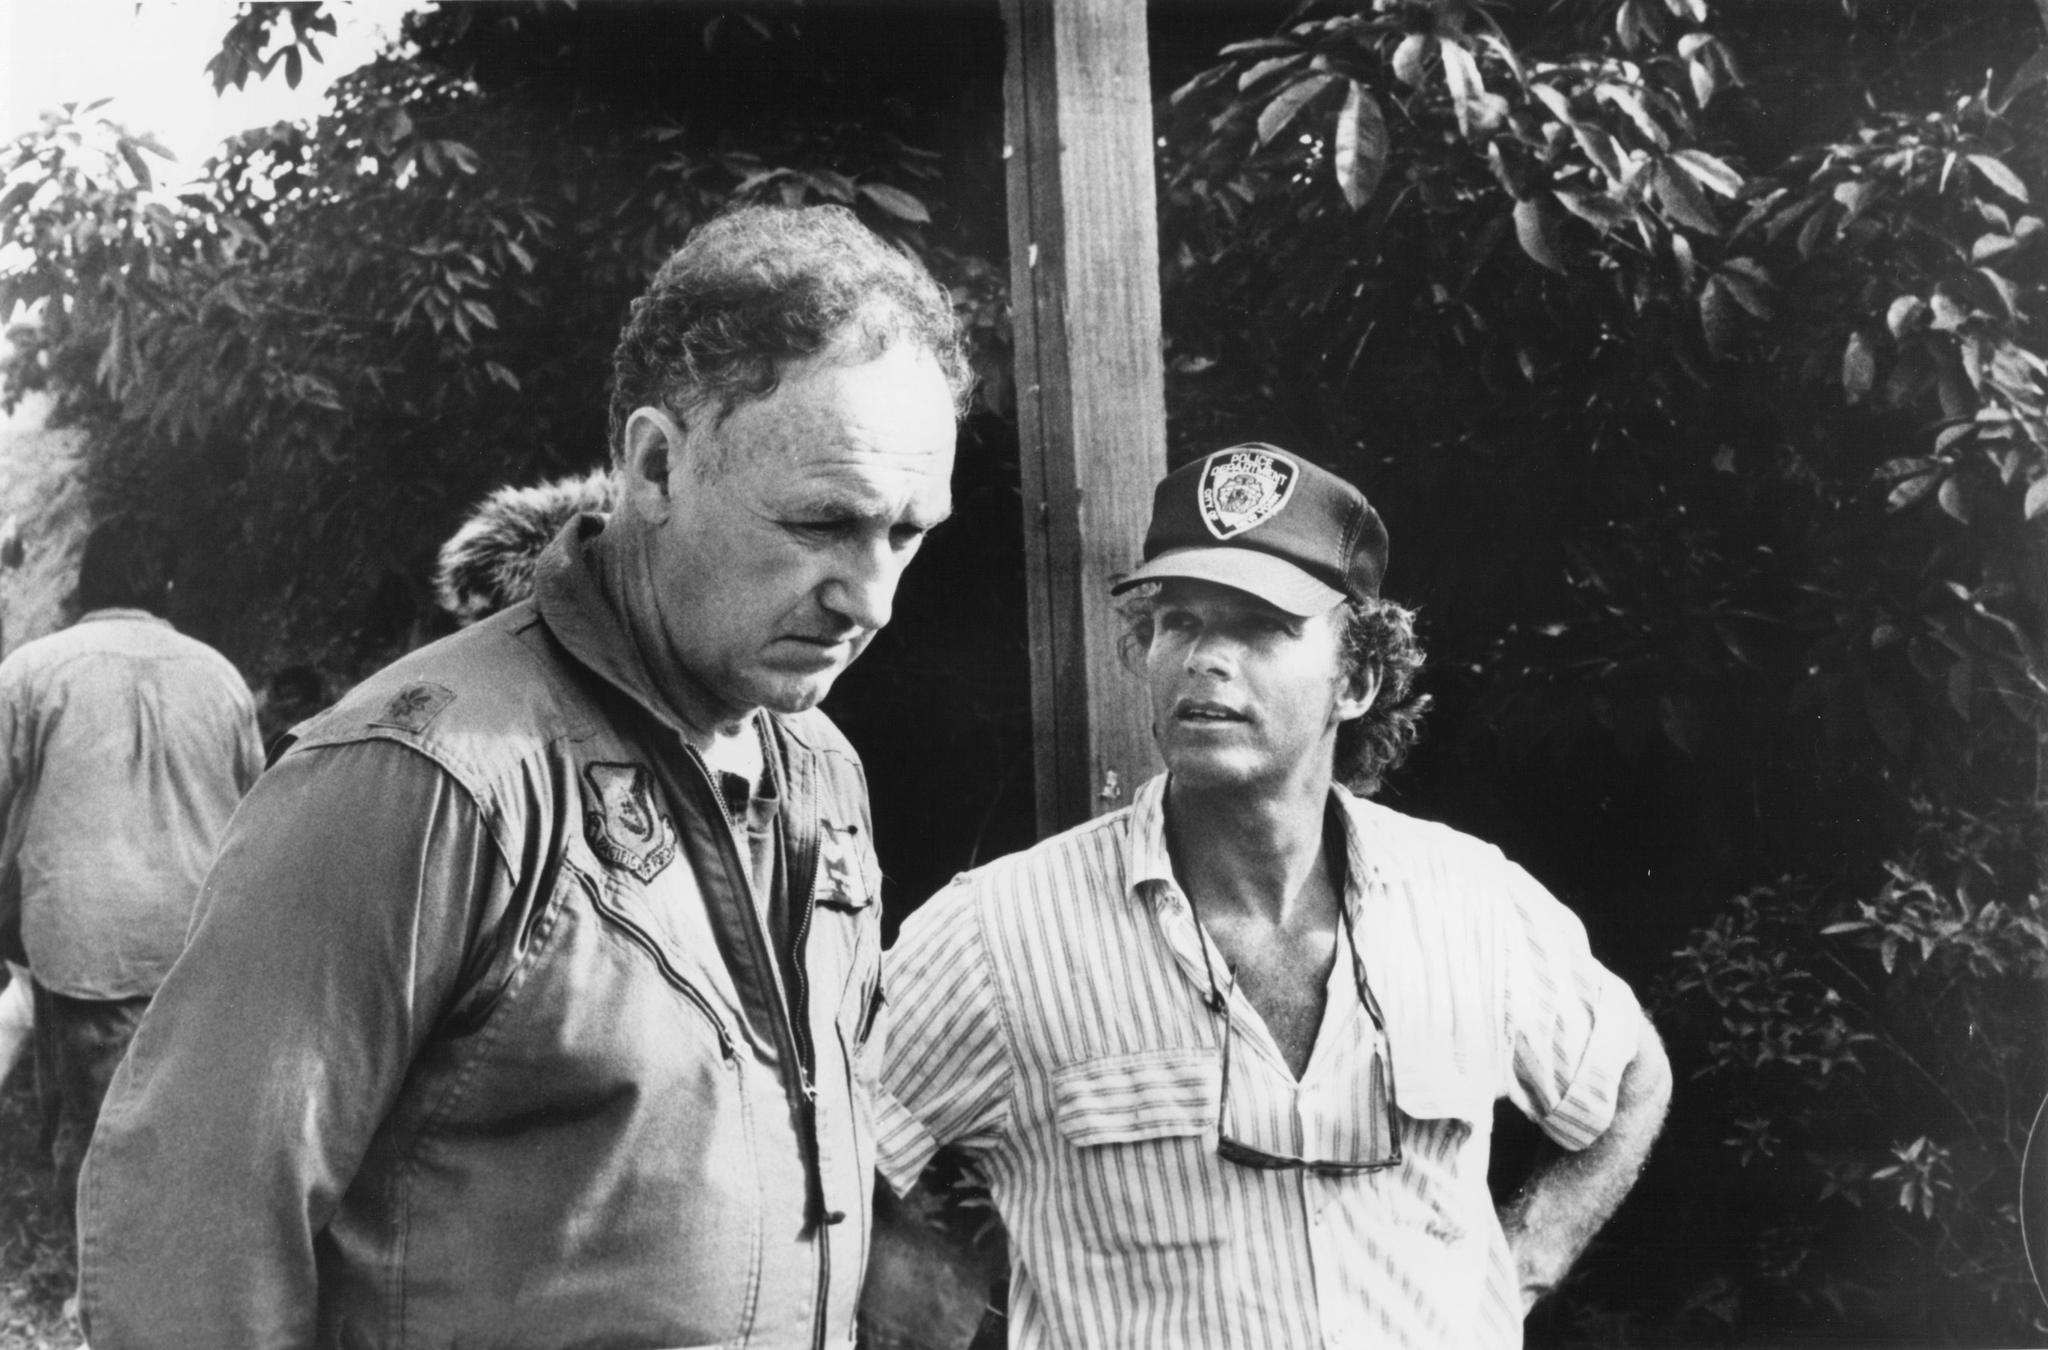 Still of Gene Hackman and Peter Markle in Bat*21 (1988)